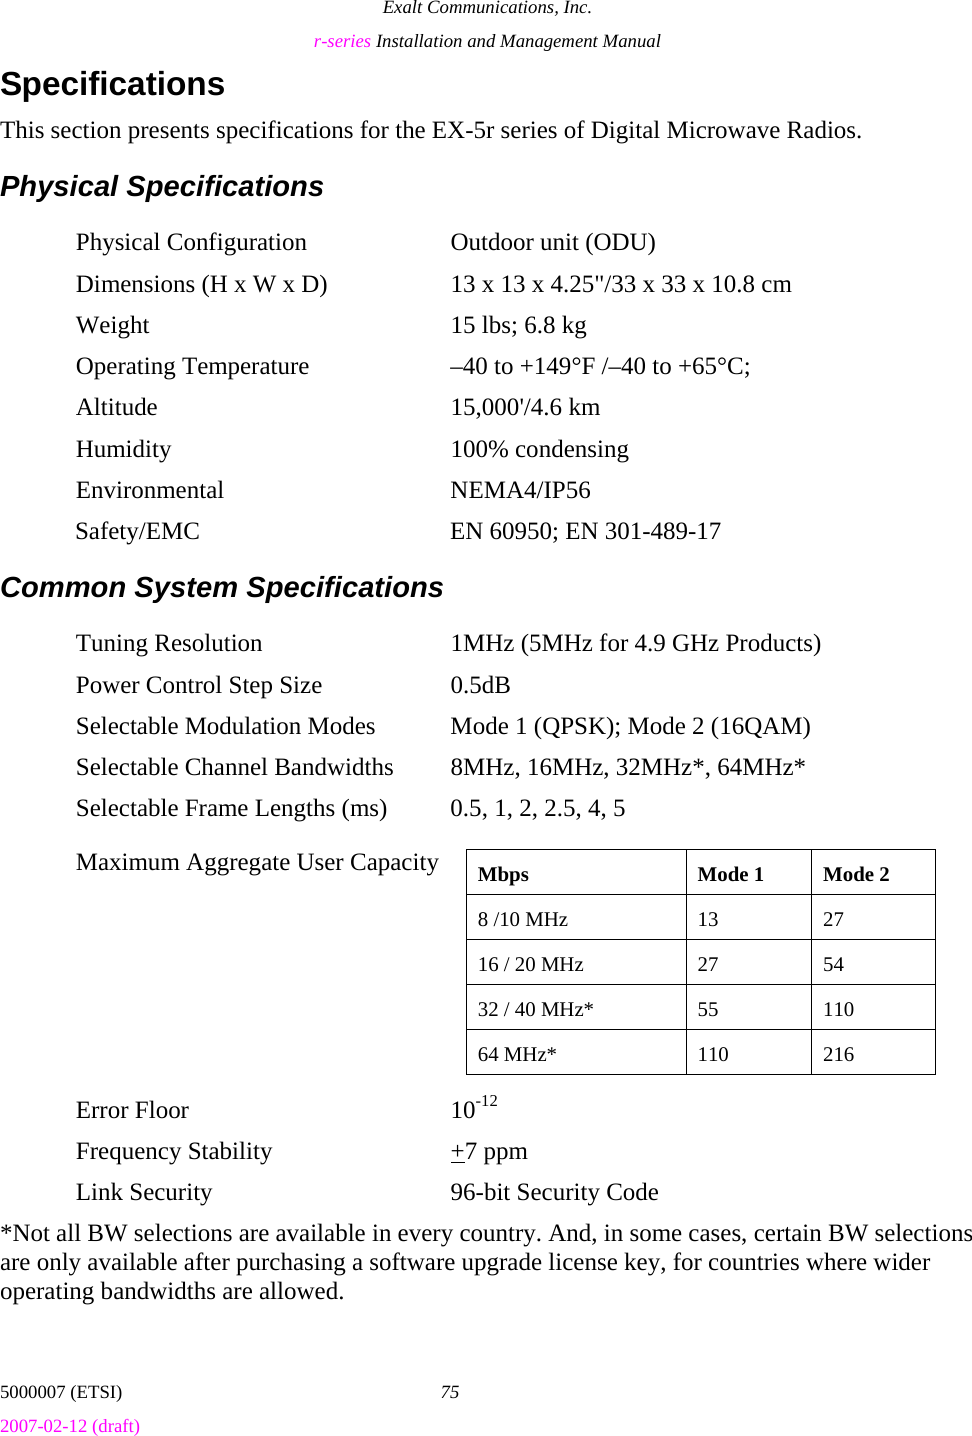 Exalt Communications, Inc. r-series Installation and Management Manual 5000007 (ETSI)  75 2007-02-12 (draft)  Specifications This section presents specifications for the EX-5r series of Digital Microwave Radios. Physical Specifications   Physical Configuration  Outdoor unit (ODU)   Dimensions (H x W x D)  13 x 13 x 4.25&quot;/33 x 33 x 10.8 cm   Weight  15 lbs; 6.8 kg   Operating Temperature  –40 to +149°F /–40 to +65°C;   Altitude  15,000&apos;/4.6 km   Humidity  100% condensing  Environmental  NEMA4/IP56 Safety/EMC    EN 60950; EN 301-489-17 Common System Specifications   Tuning Resolution  1MHz (5MHz for 4.9 GHz Products)   Power Control Step Size  0.5dB   Selectable Modulation Modes  Mode 1 (QPSK); Mode 2 (16QAM)   Selectable Channel Bandwidths  8MHz, 16MHz, 32MHz*, 64MHz*   Selectable Frame Lengths (ms)  0.5, 1, 2, 2.5, 4, 5  Maximum Aggregate User Capacity       Error Floor  10-12  Frequency Stability  +7 ppm   Link Security  96-bit Security Code *Not all BW selections are available in every country. And, in some cases, certain BW selections are only available after purchasing a software upgrade license key, for countries where wider operating bandwidths are allowed. Mbps  Mode 1  Mode 2 8 /10 MHz  13  27 16 / 20 MHz  27  54 32 / 40 MHz*  55  110 64 MHz*  110  216 